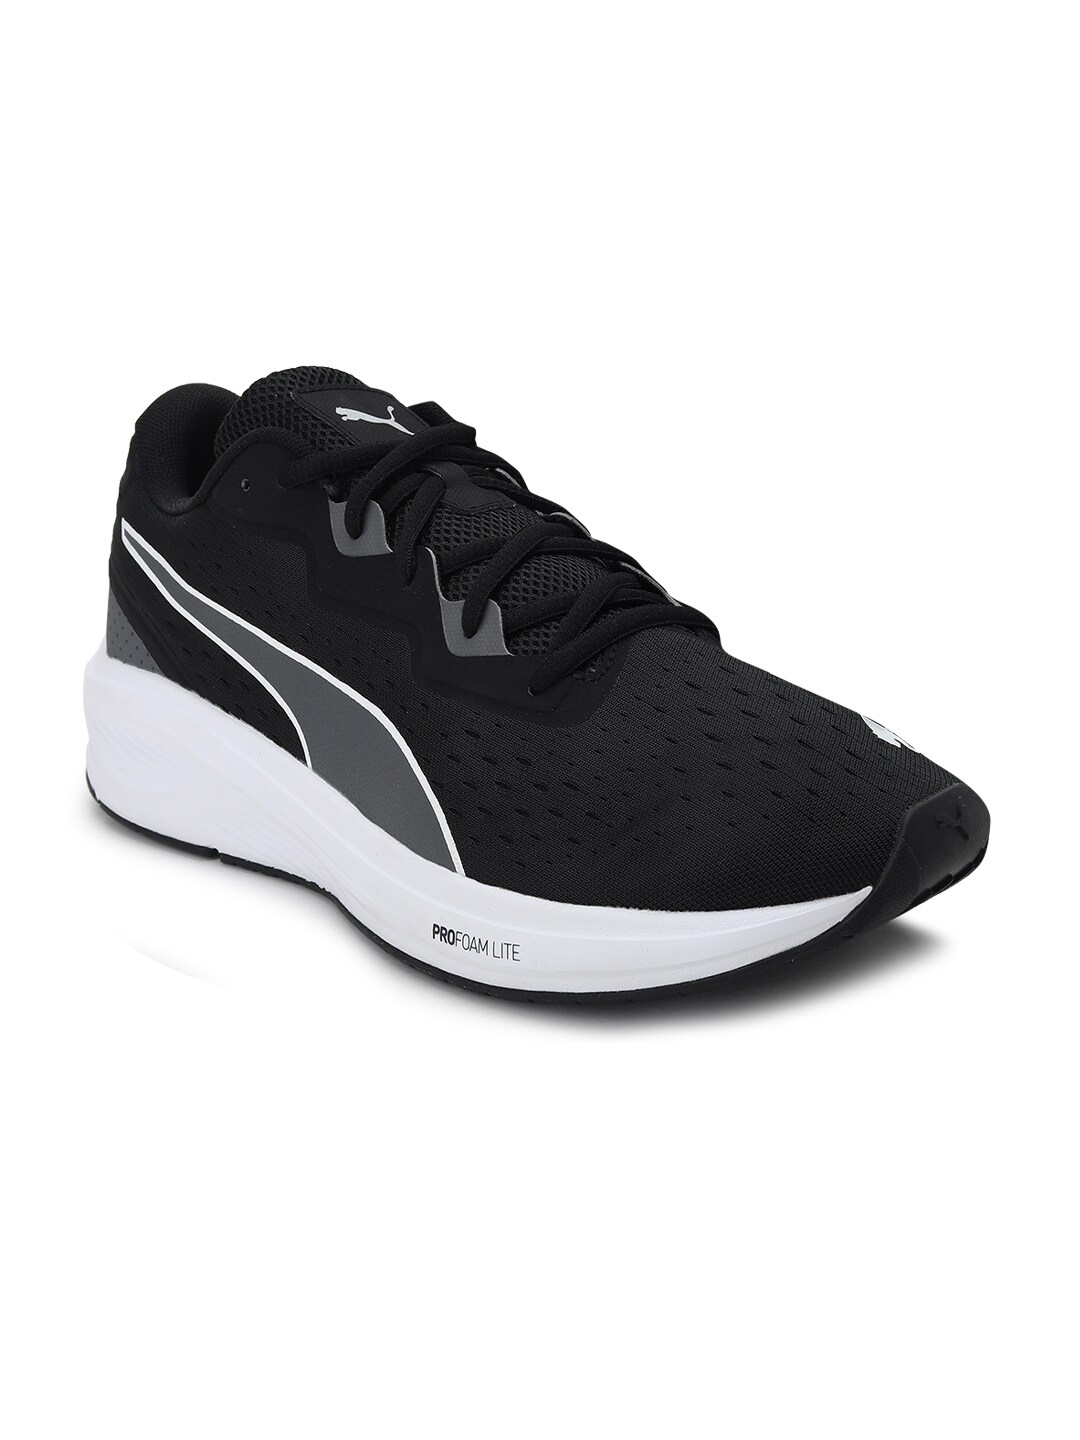 Buy Puma Unisex Black & White Textile Running Shoes - Sports Shoes for ...